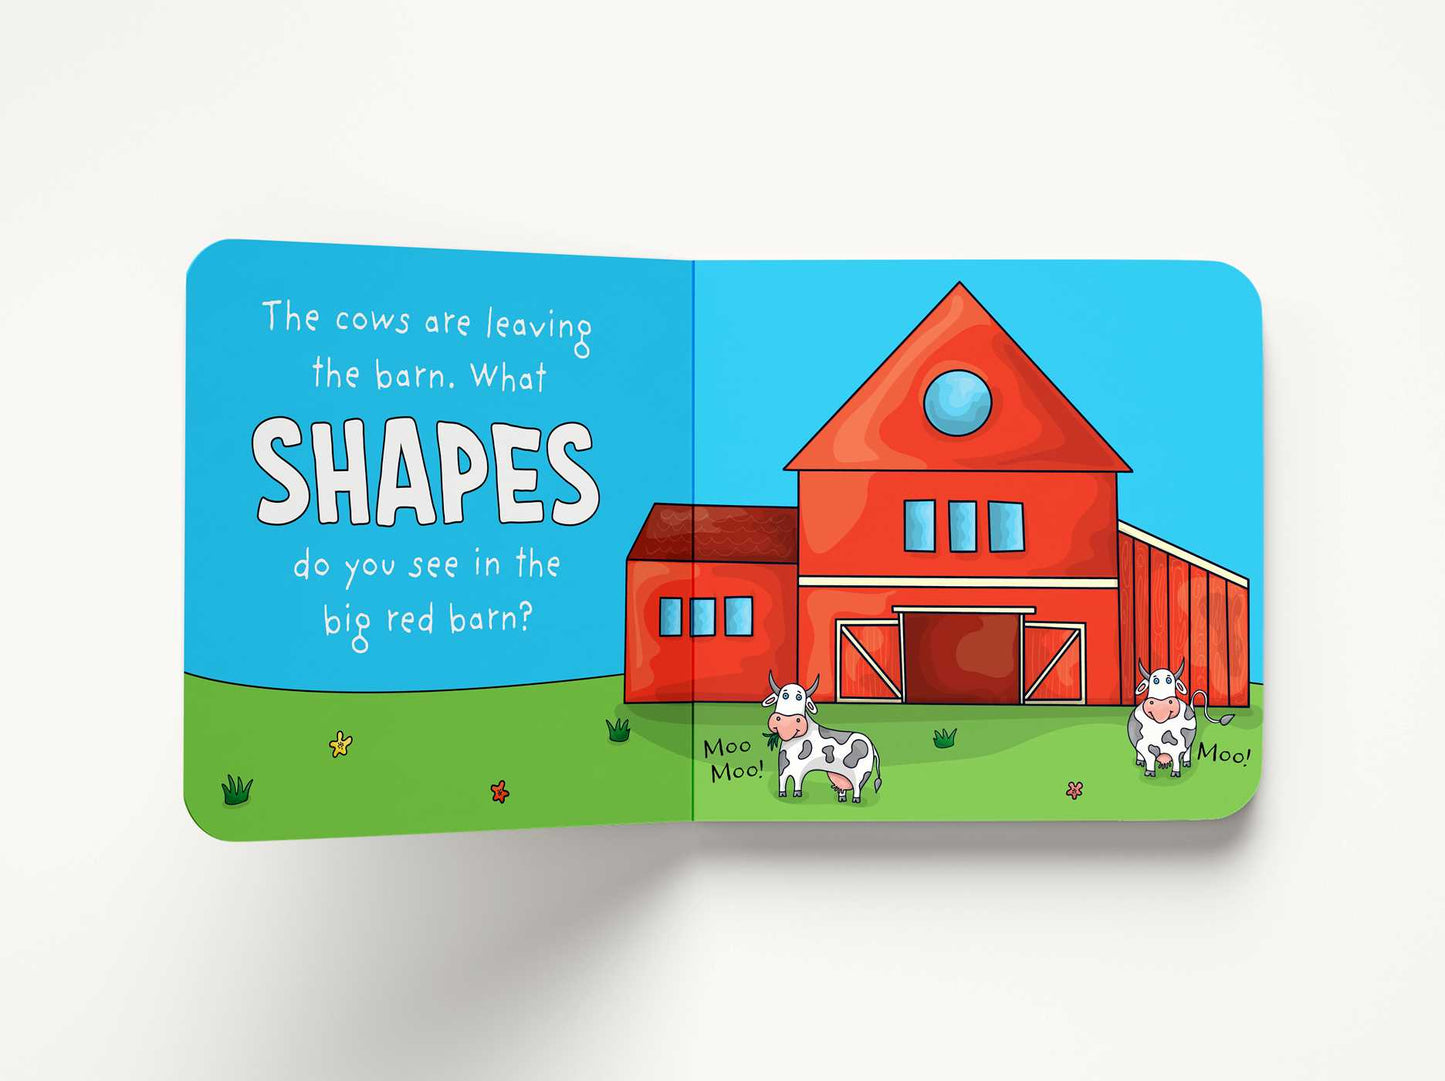 My First Shapes Book: Barnyard Animals: Kids Learn their Shapes with this Educational and Fun Board Book!